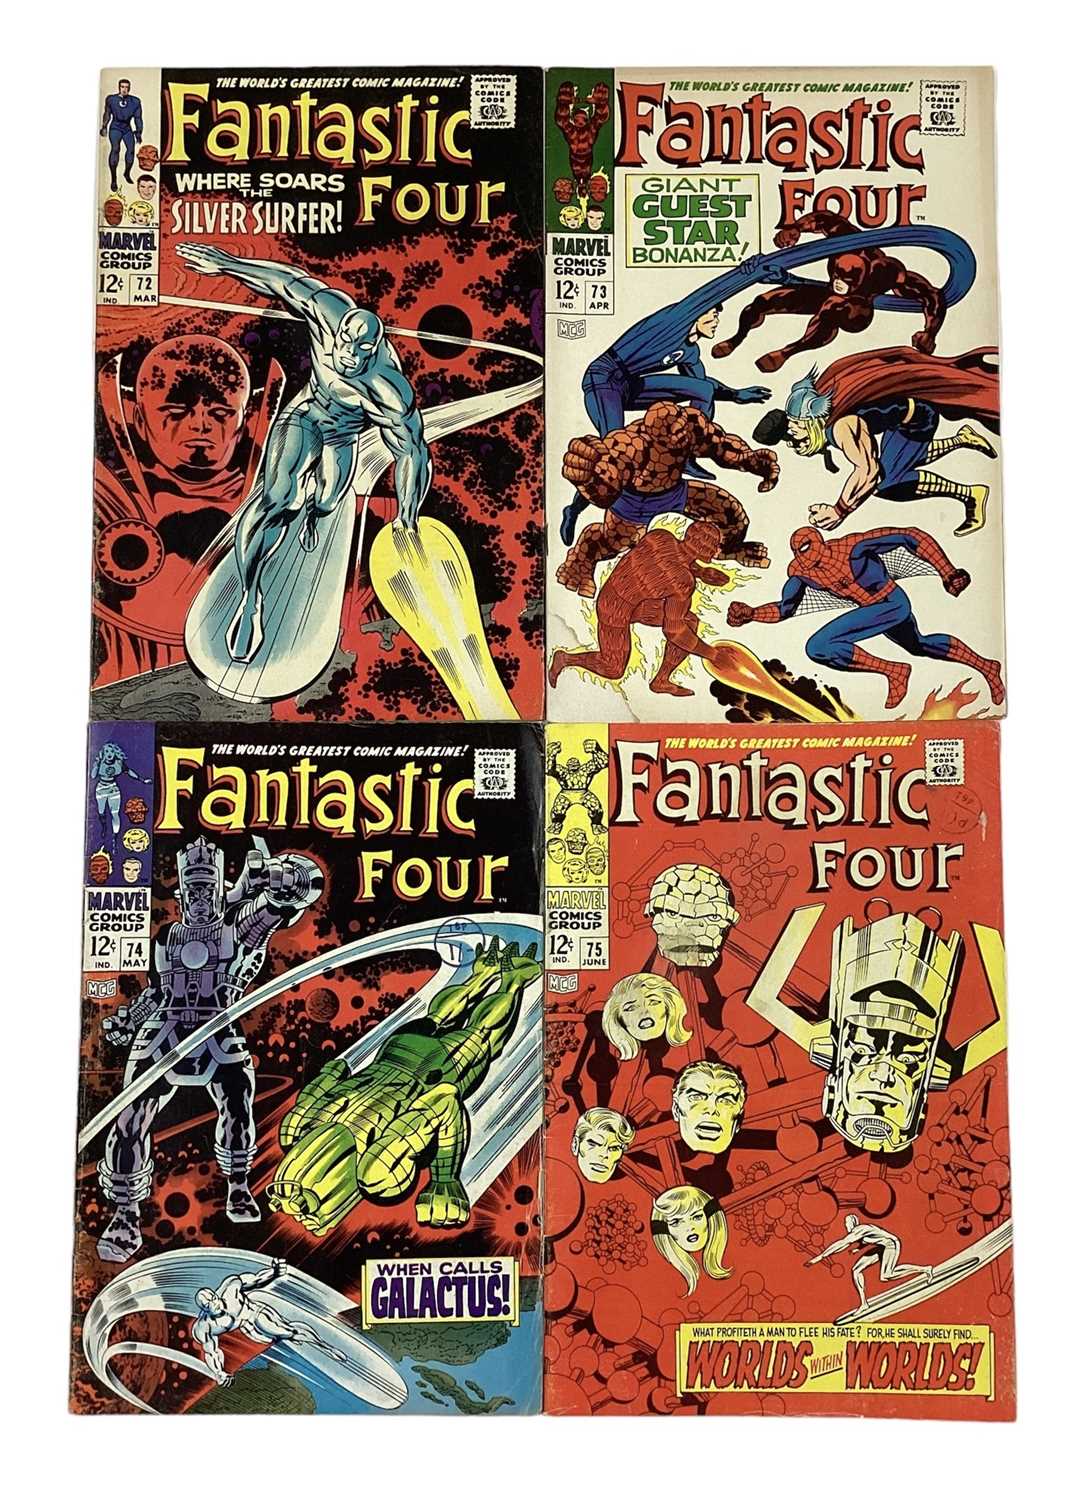 Lot 28 - Marvel Comics Fantastic Four (1968). Issues 72, 73, 74 and 75. To include issue 72 Silver Surfer and watcher apperance , and issue 74 Galactus apperance. All priced 12 cents. (4)